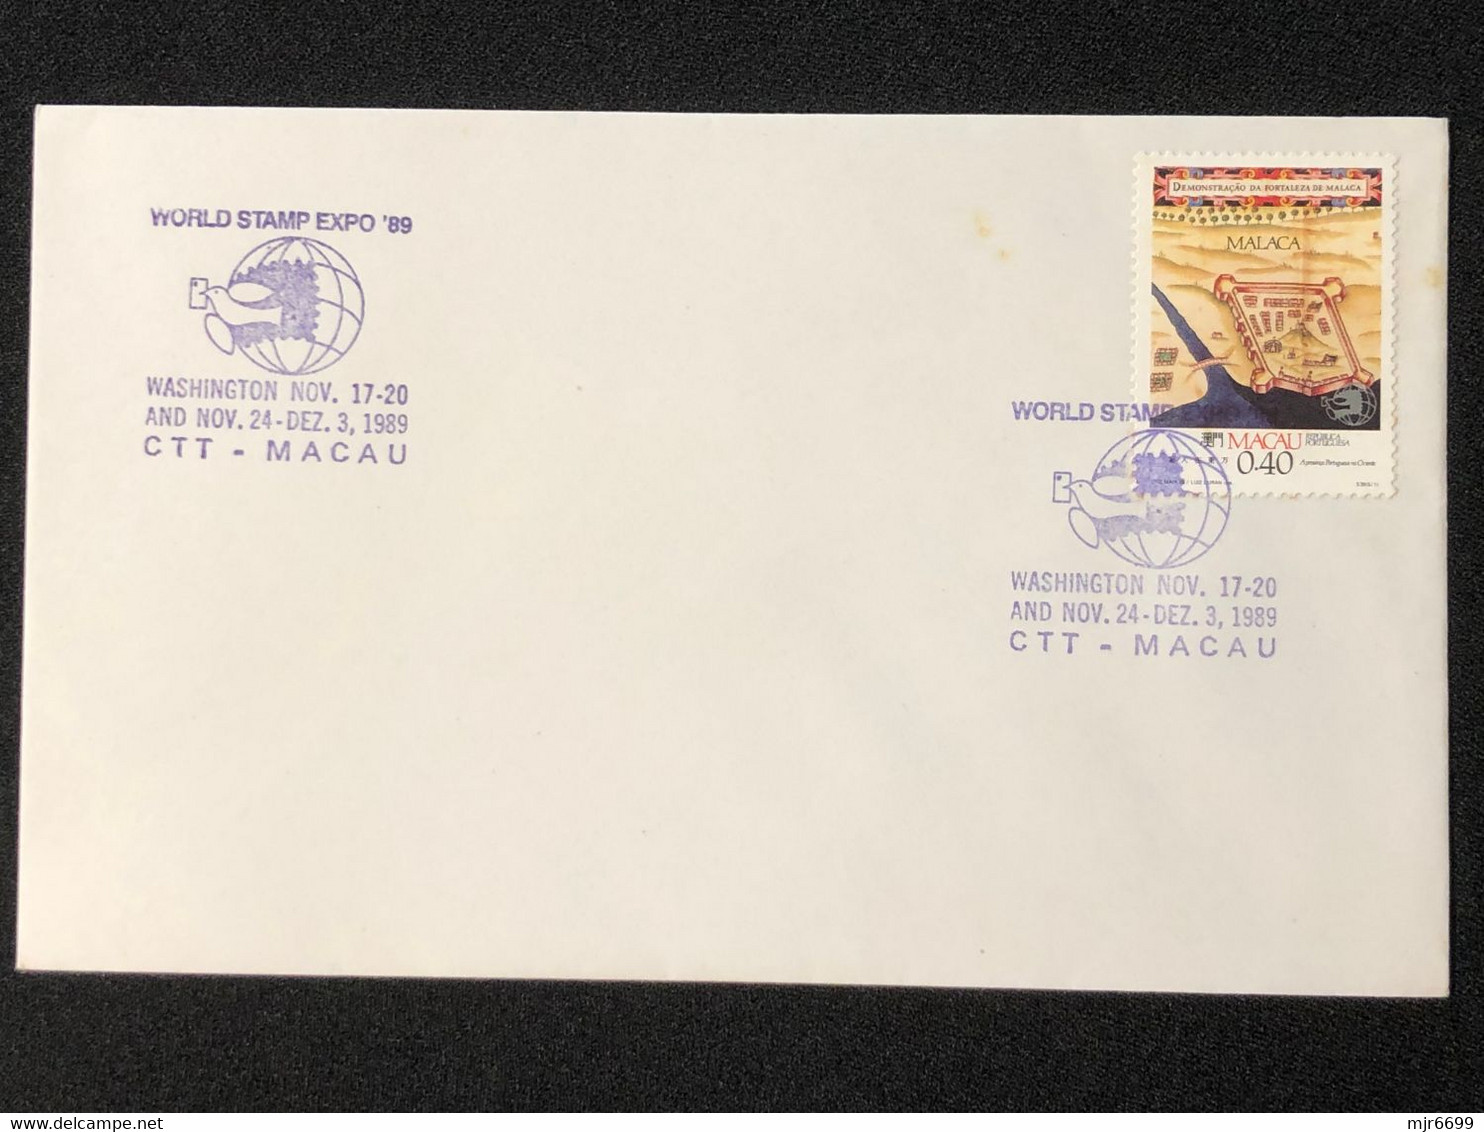 MACAU WORLD STAMP EXPO"90 (WASHINGTHON) COMMEMORATIVE CANCELLATION ON PLAIN COVER - Covers & Documents